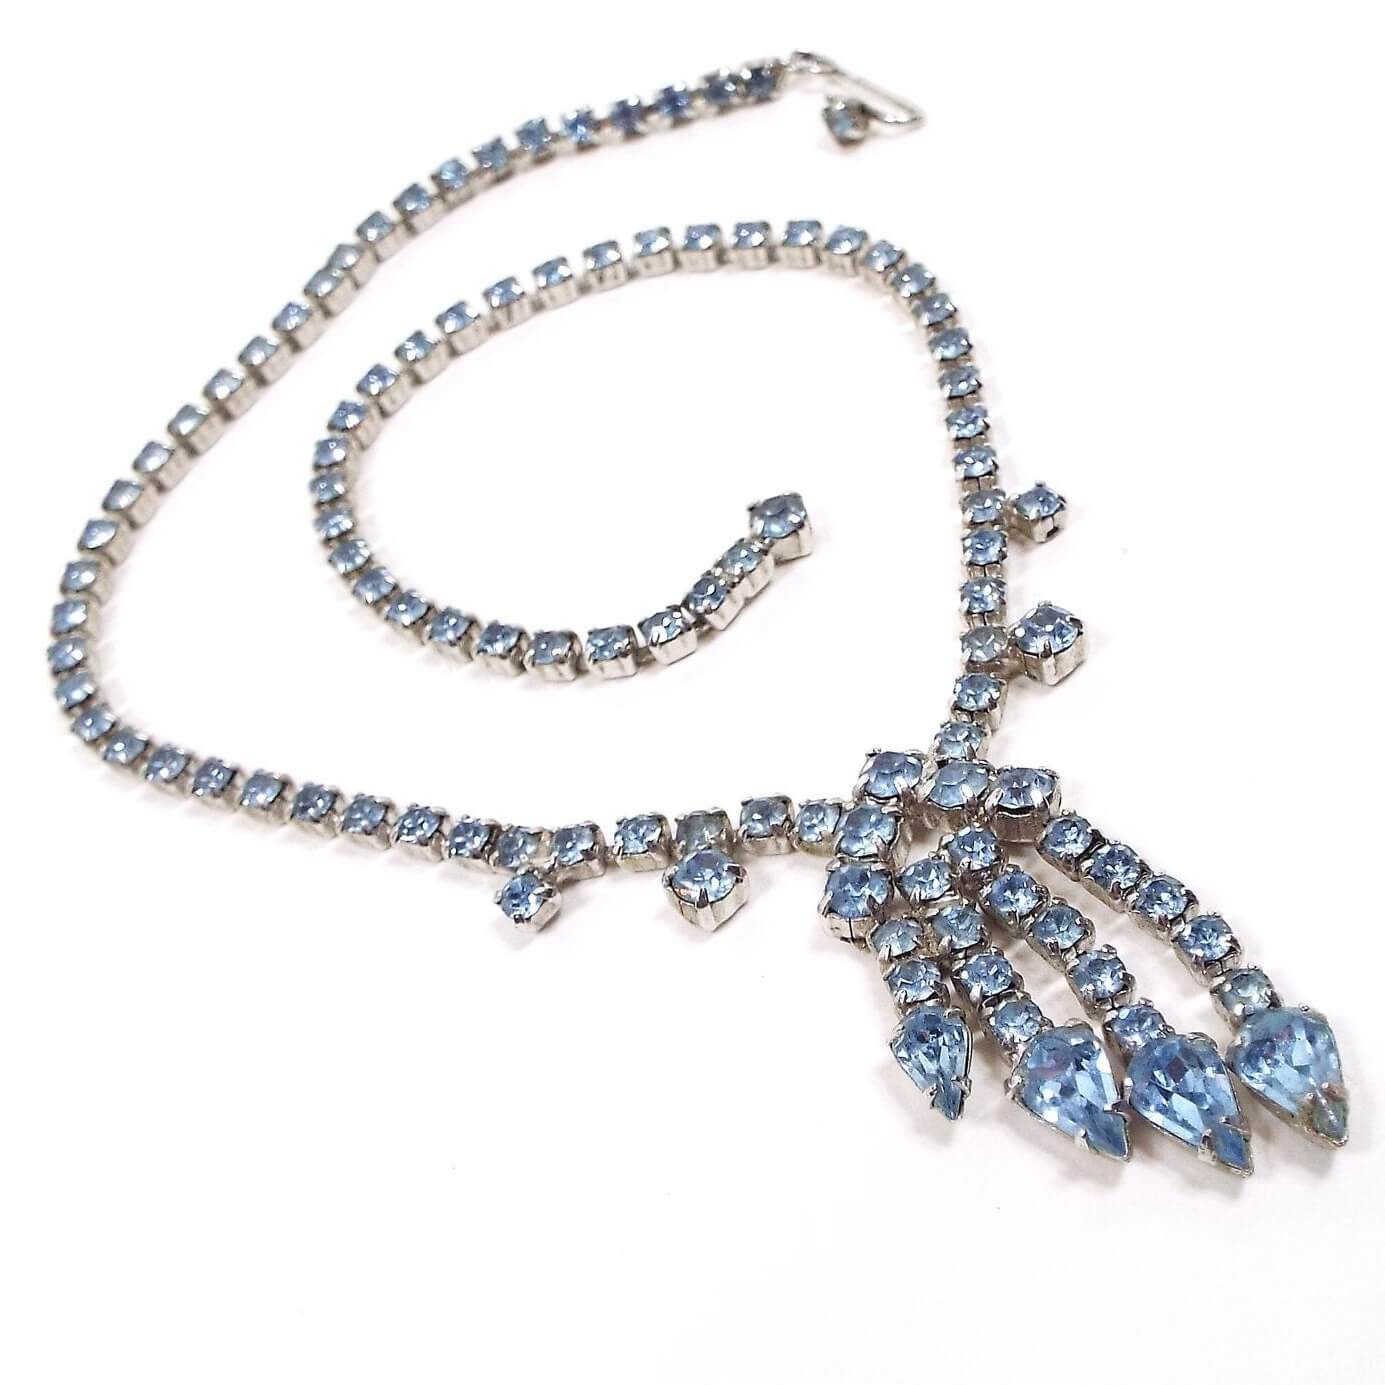 Front view of the Mid Century vintage blue rhinestone necklace. The cup chain is silver tone in color and has a hook clasp on the end. The bottom area has a chandelier style design with teardrop rhinestones on the end. The rhinestones are light blue in color.